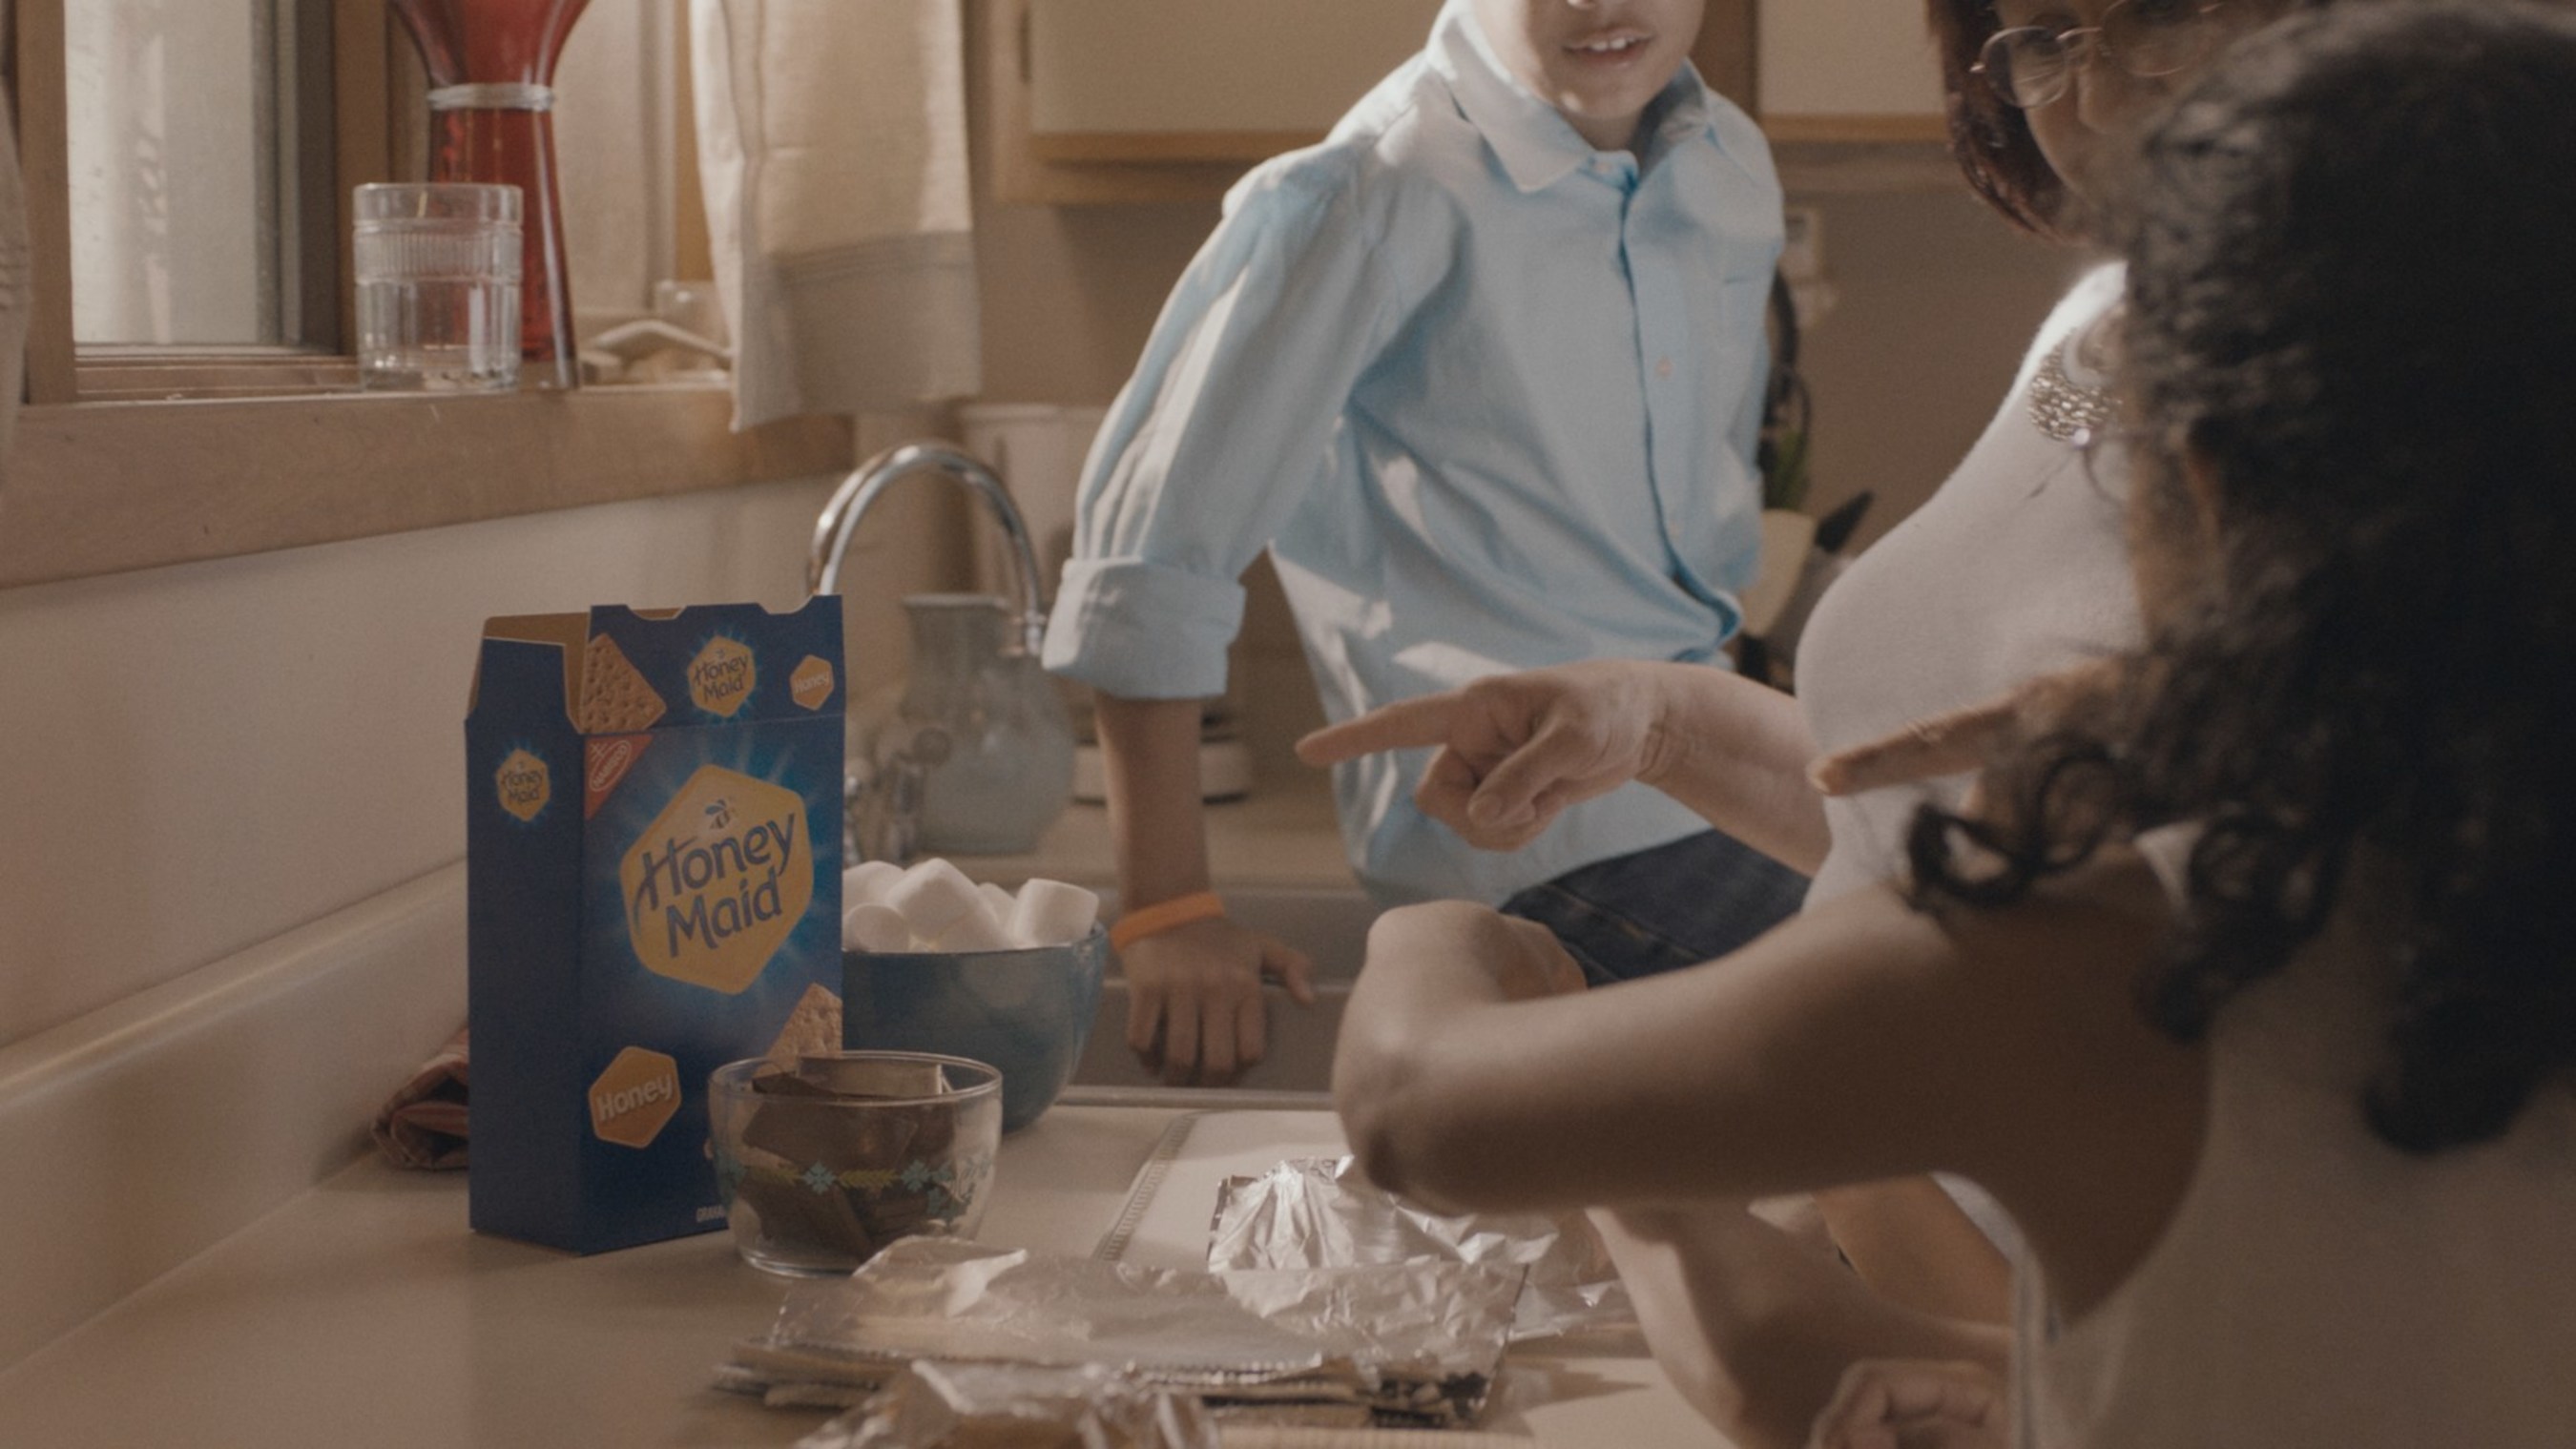 The "This is Wholesome" campaign was launched in 2014 to recognize that, over time, Honey Maid and the families who enjoy its products have evolved.